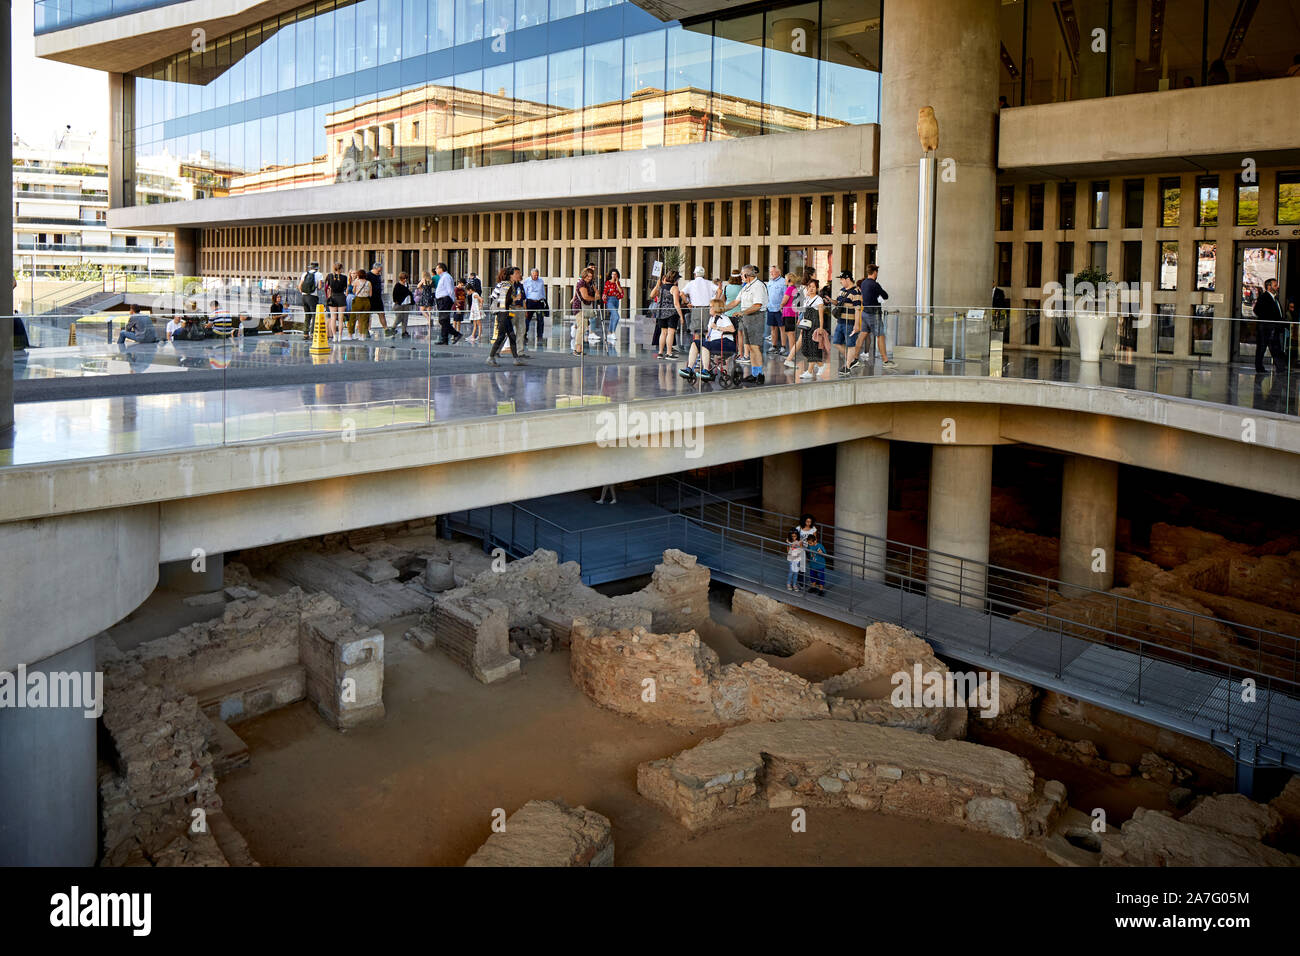 Athens capital of Greece Acropolis Museum, Ultramodern glass & steel museum housing ancient artifacts from the Acropolis archaeological site Stock Photo